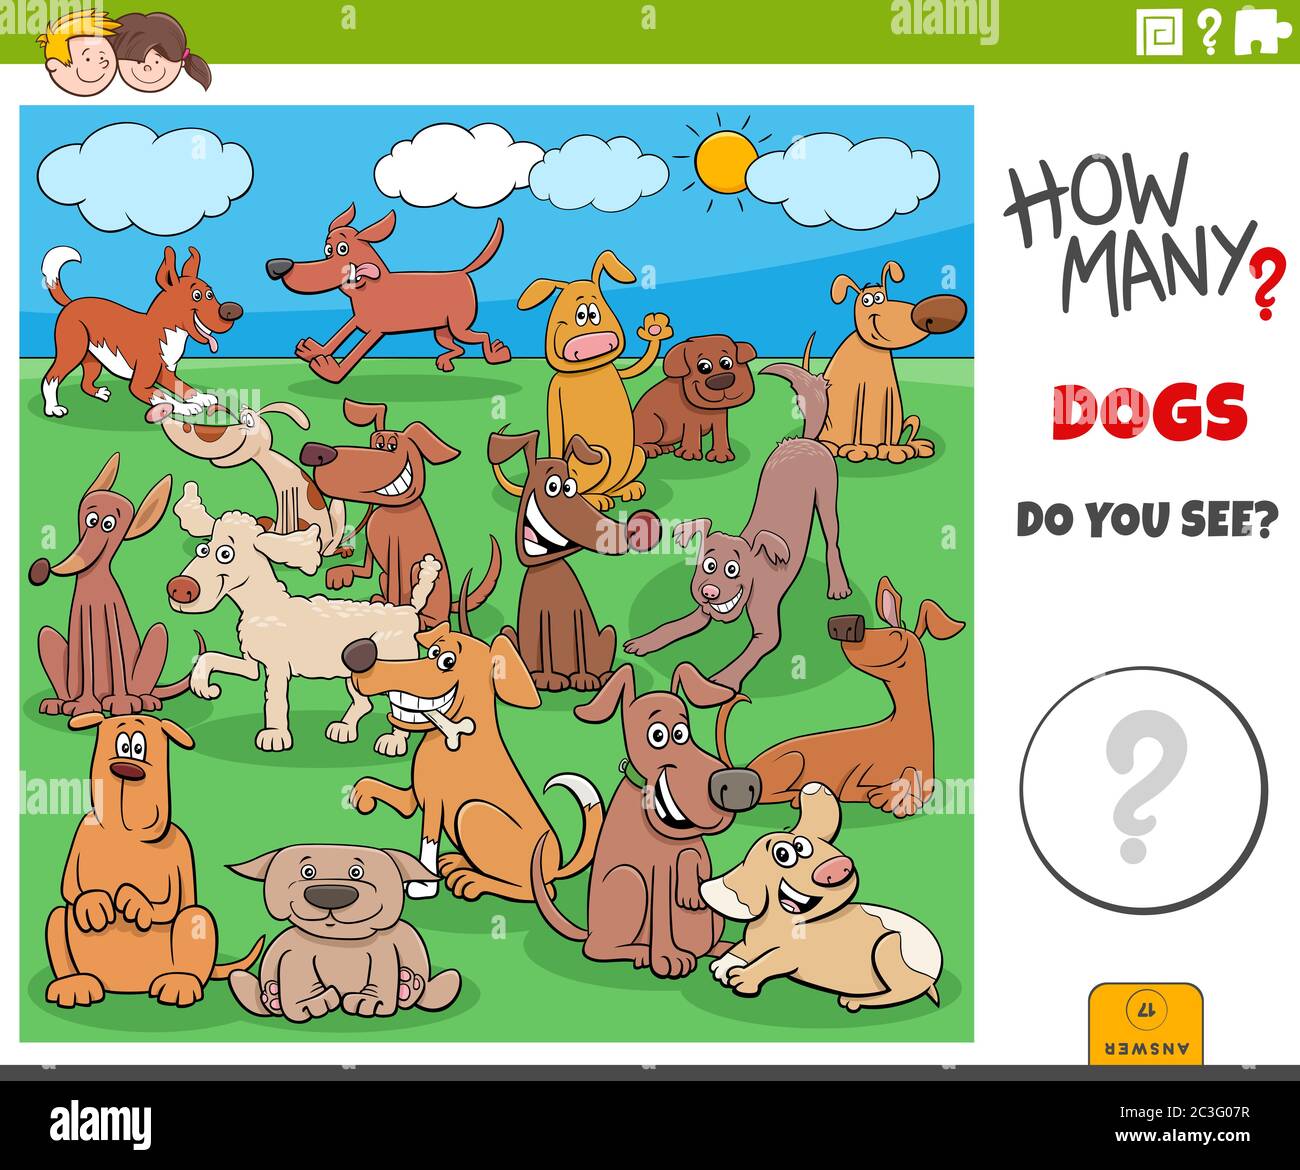 how many dogs educational game for children Stock Photo